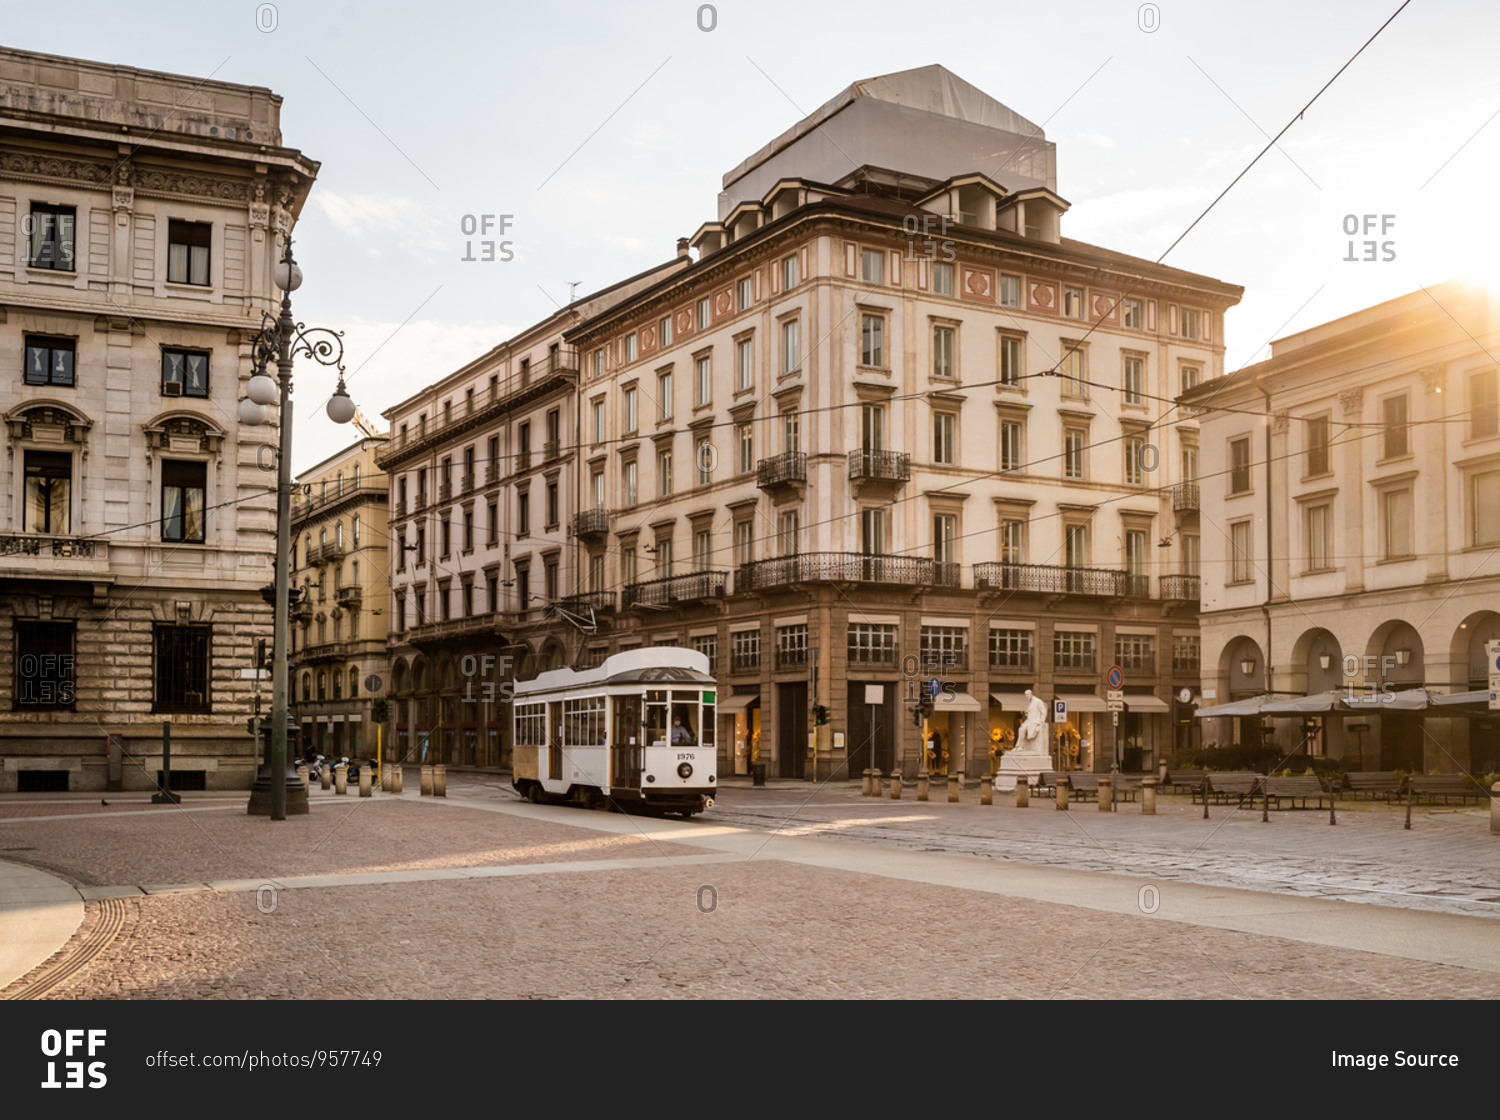 Empty streets in the city of Milan during the Corona Virus lockdown period